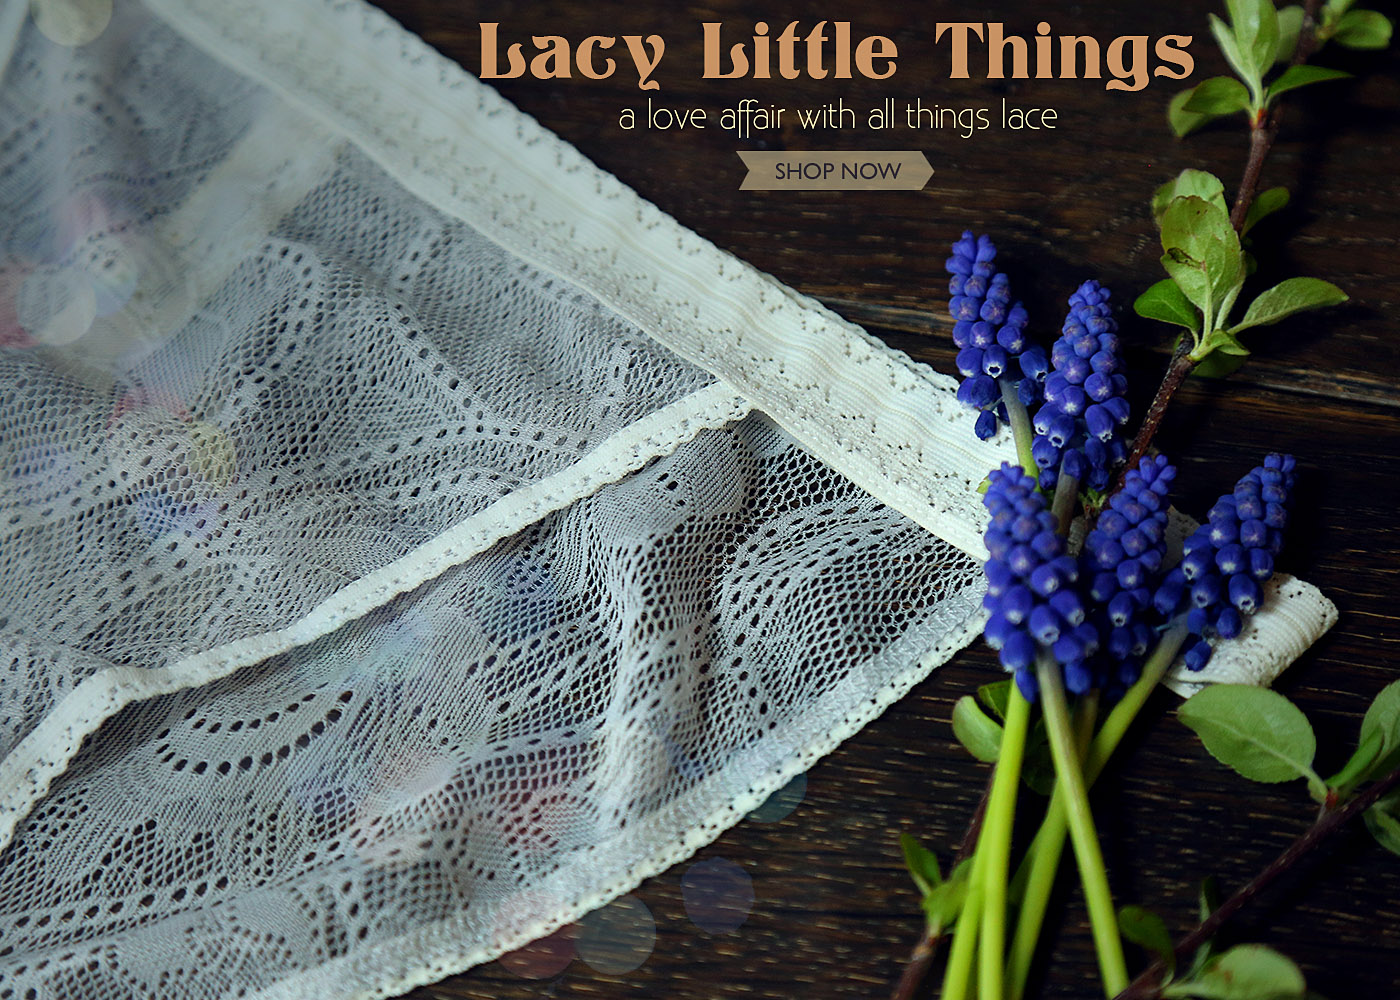 lacy little things - love affair with lace